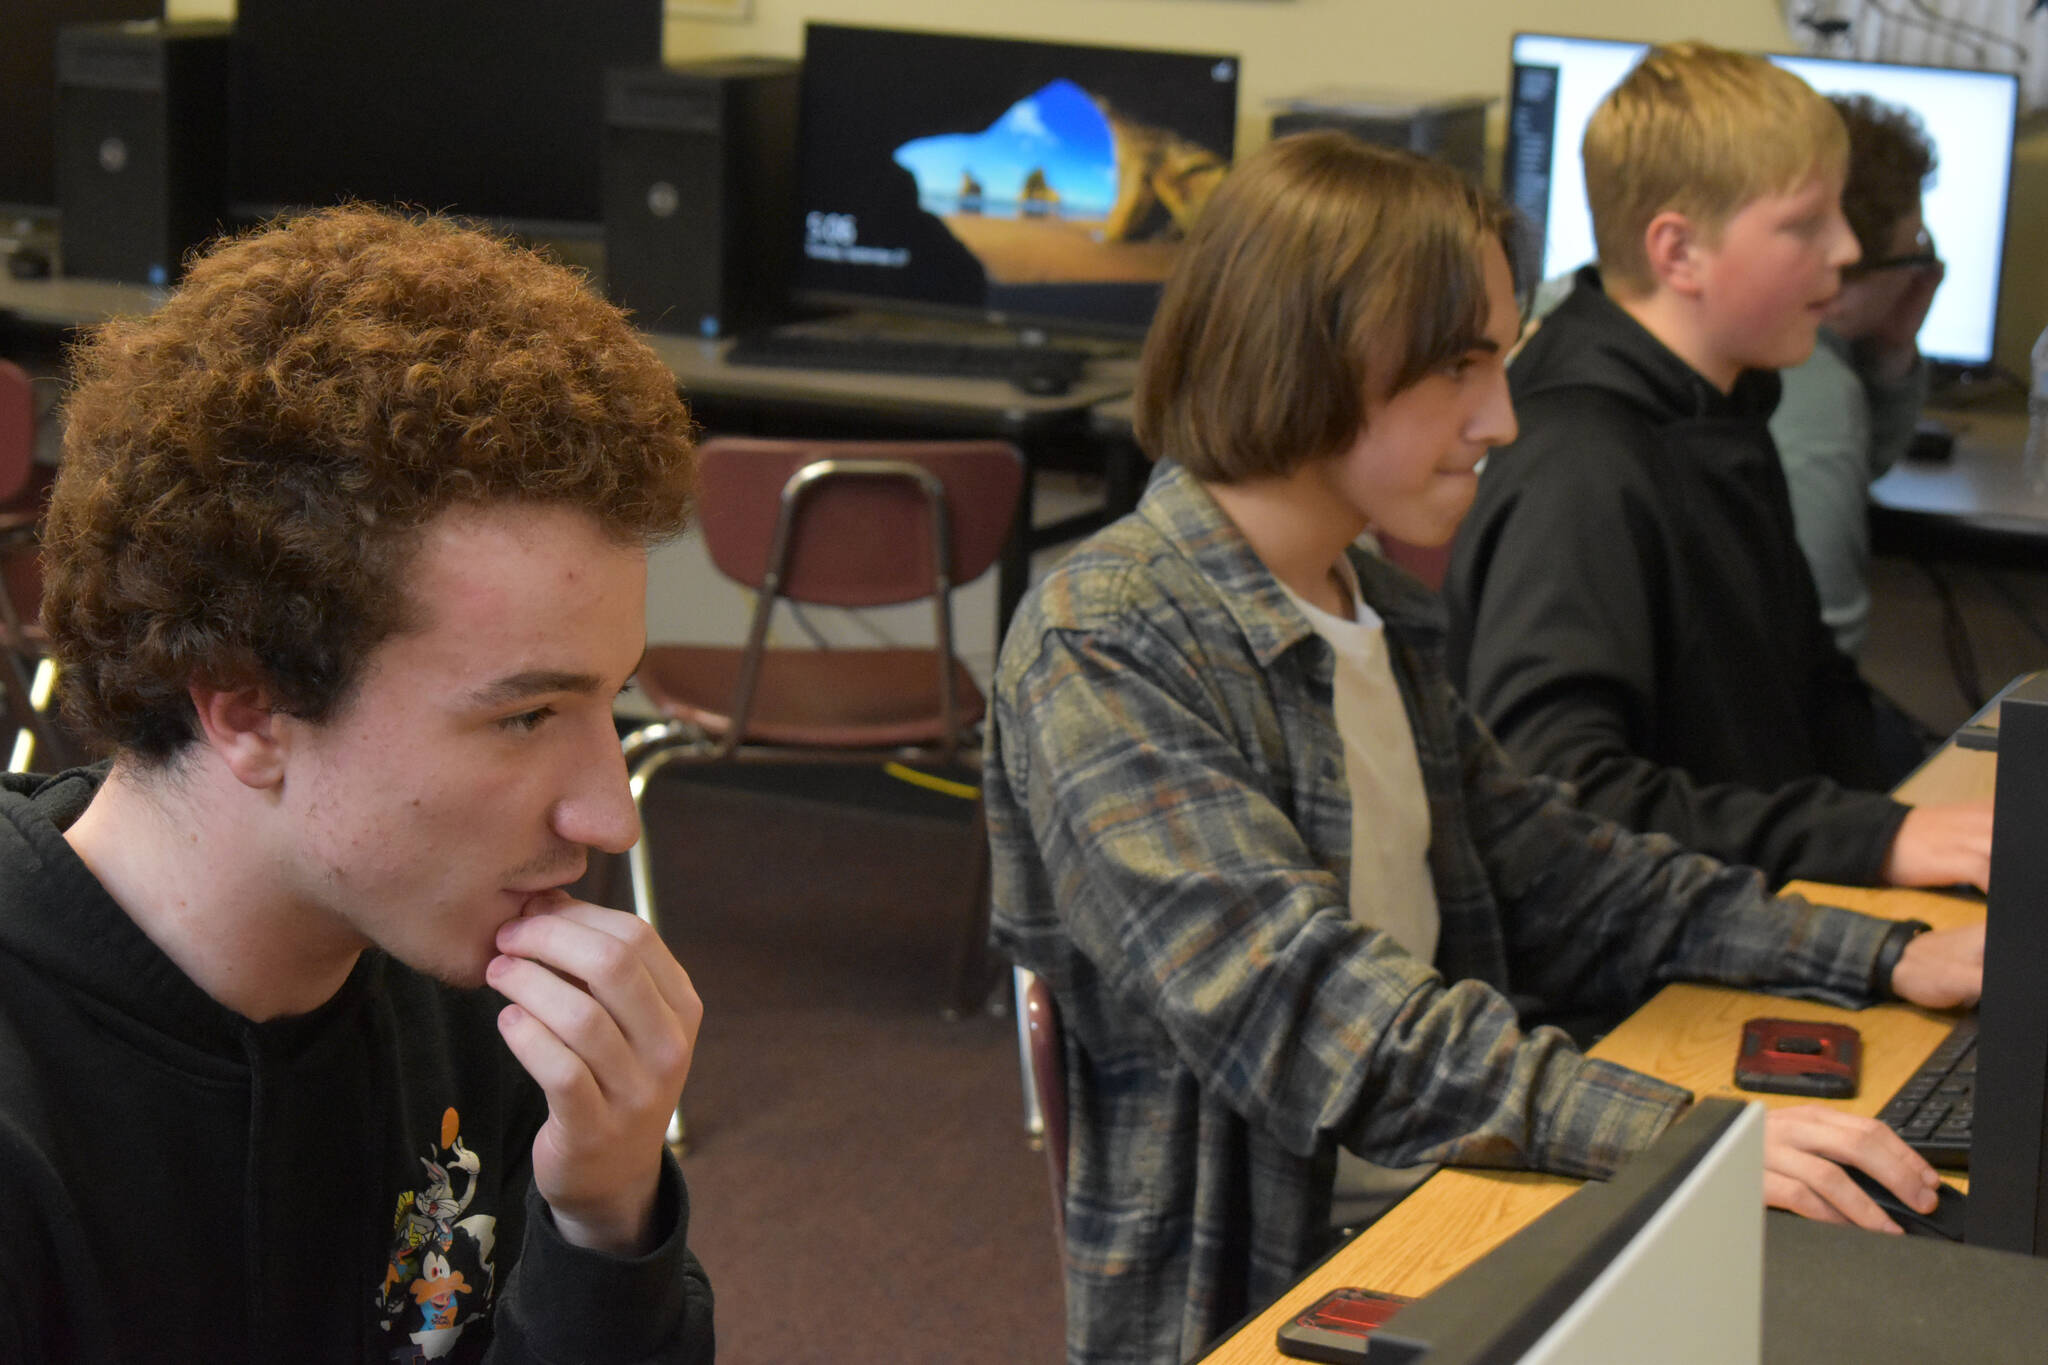 Kenai Central High School League of Legends players Silas Thibodeau, Cody Good and Roman Dunham tense up during the final push of the first game against Anchorage Christian Schools on Tuesday, Sept. 23, 2022, at Kenai Central High School in Kenai, Alaska. (Jake Dye/Peninsula Clarion)